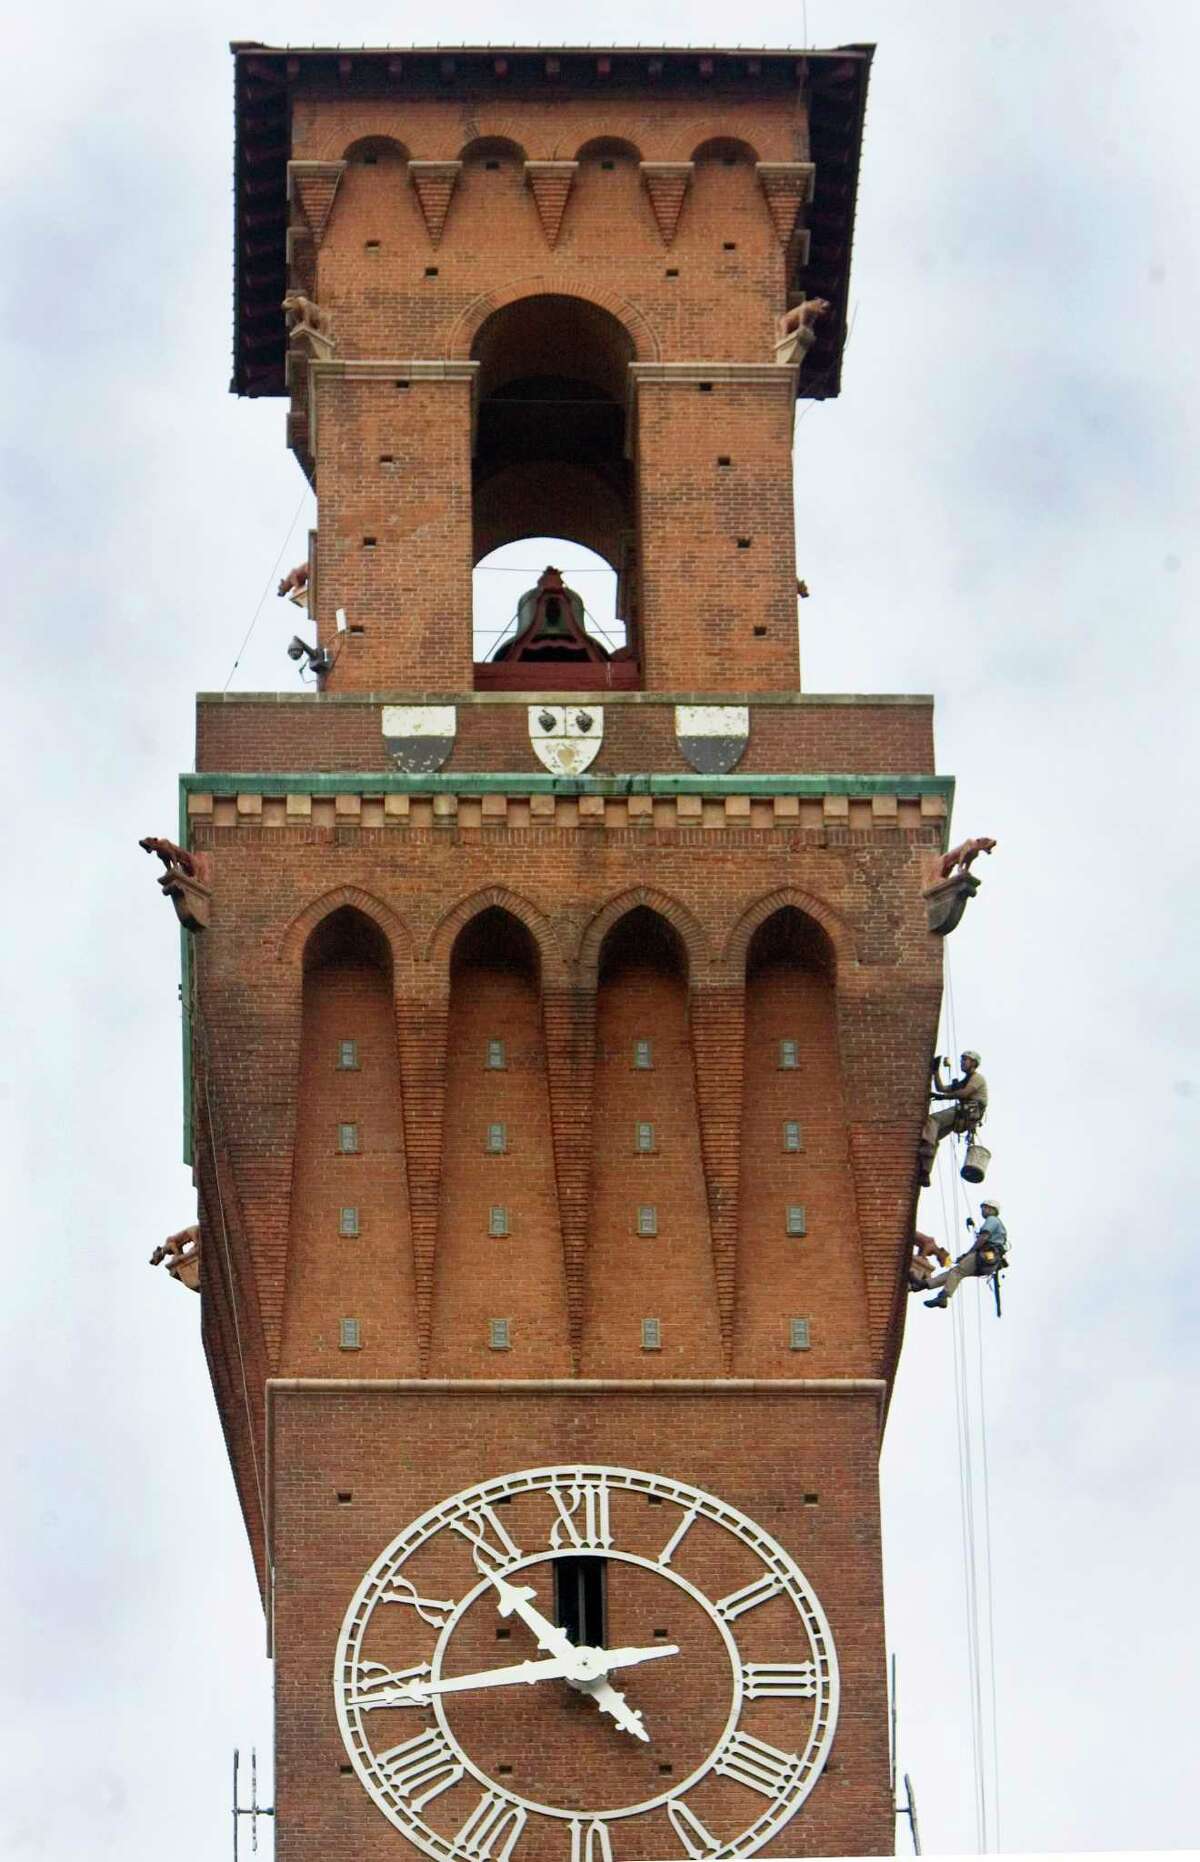 Workers descend down the Republican-American's clock tower to investigate the condition of each face of the 240-foot-tall structure in Waterbury, Conn. Thursday June 18th 2015. The results of their inspection will be used to design repairs to the 109-year-old clock tower. (Steven Valenti/The Republican-American via AP) MANDATORY CREDIT